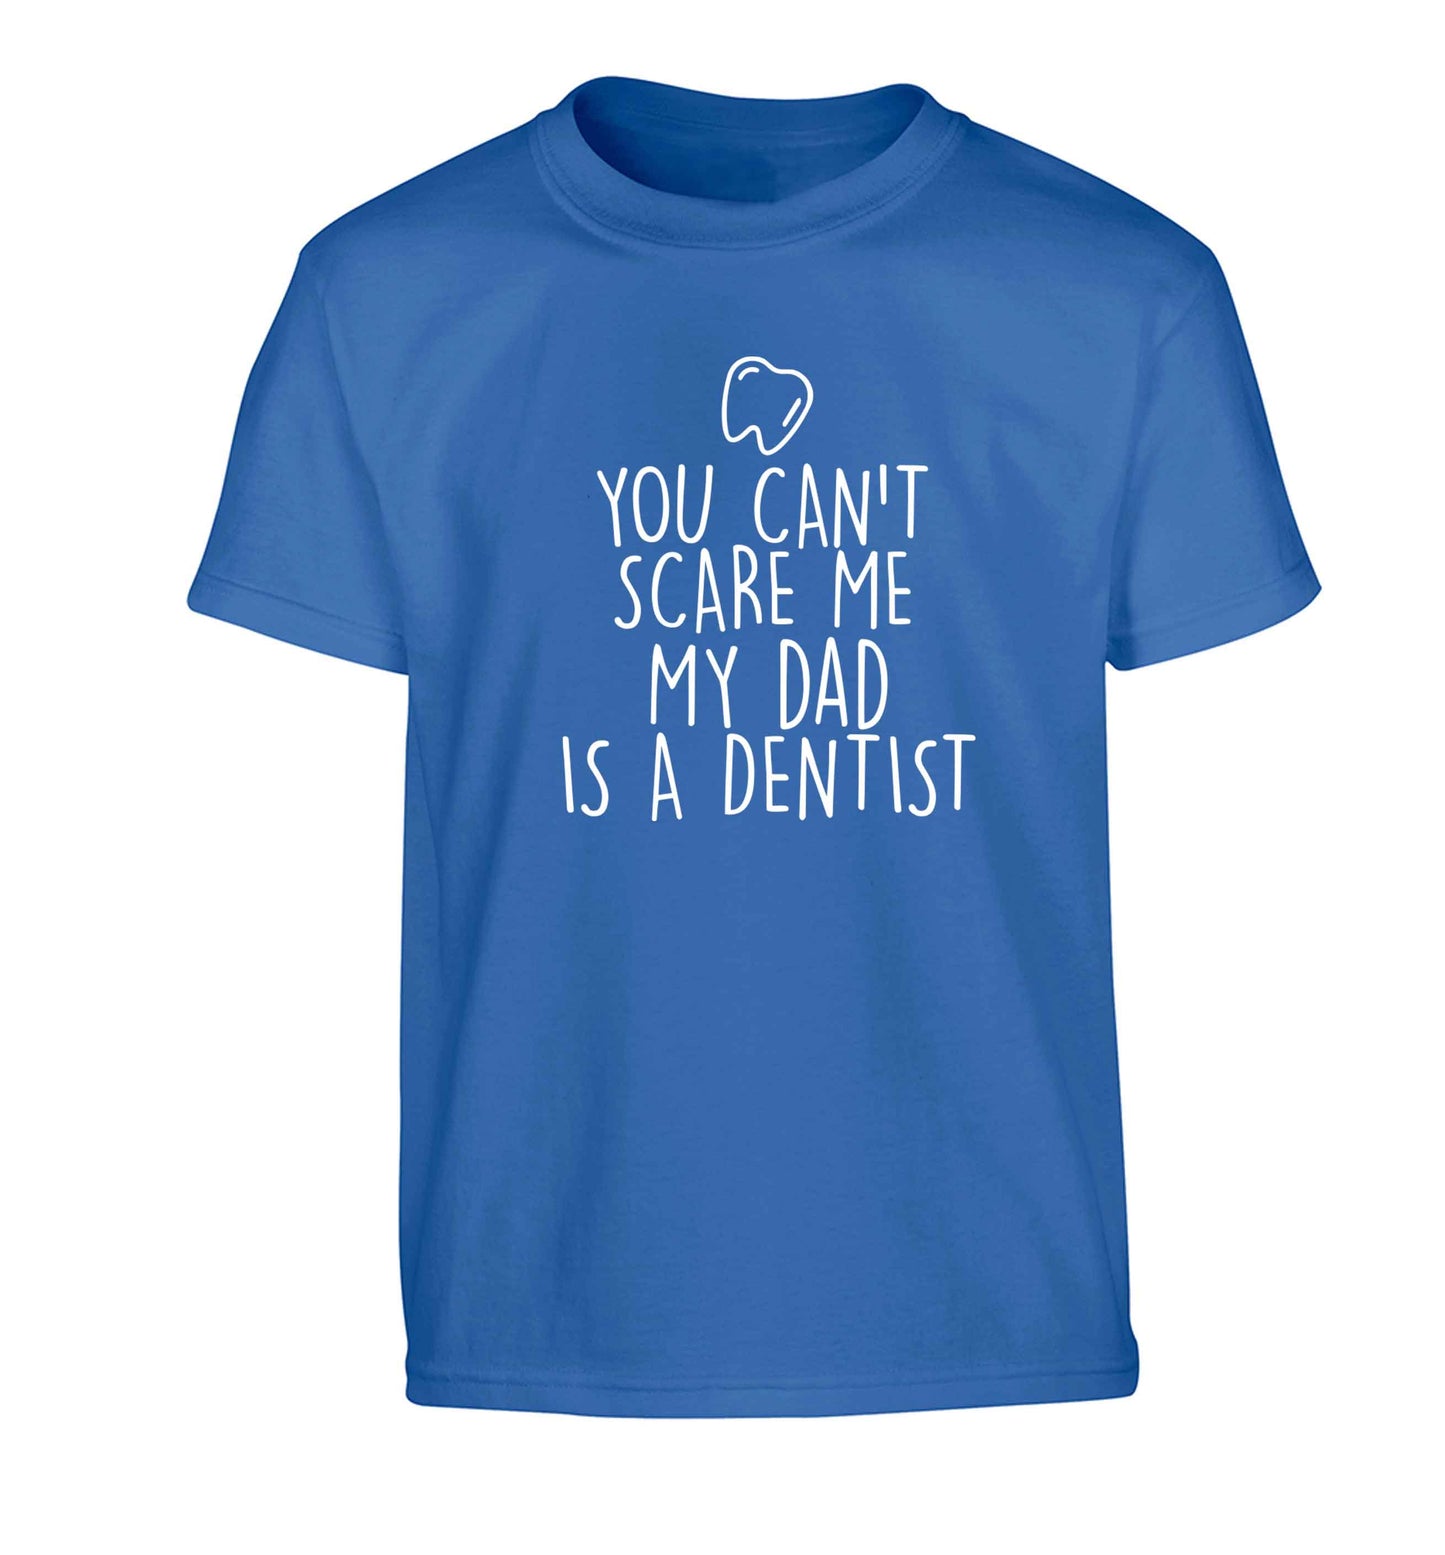 You can't scare me my dad is a dentist Children's blue Tshirt 12-13 Years